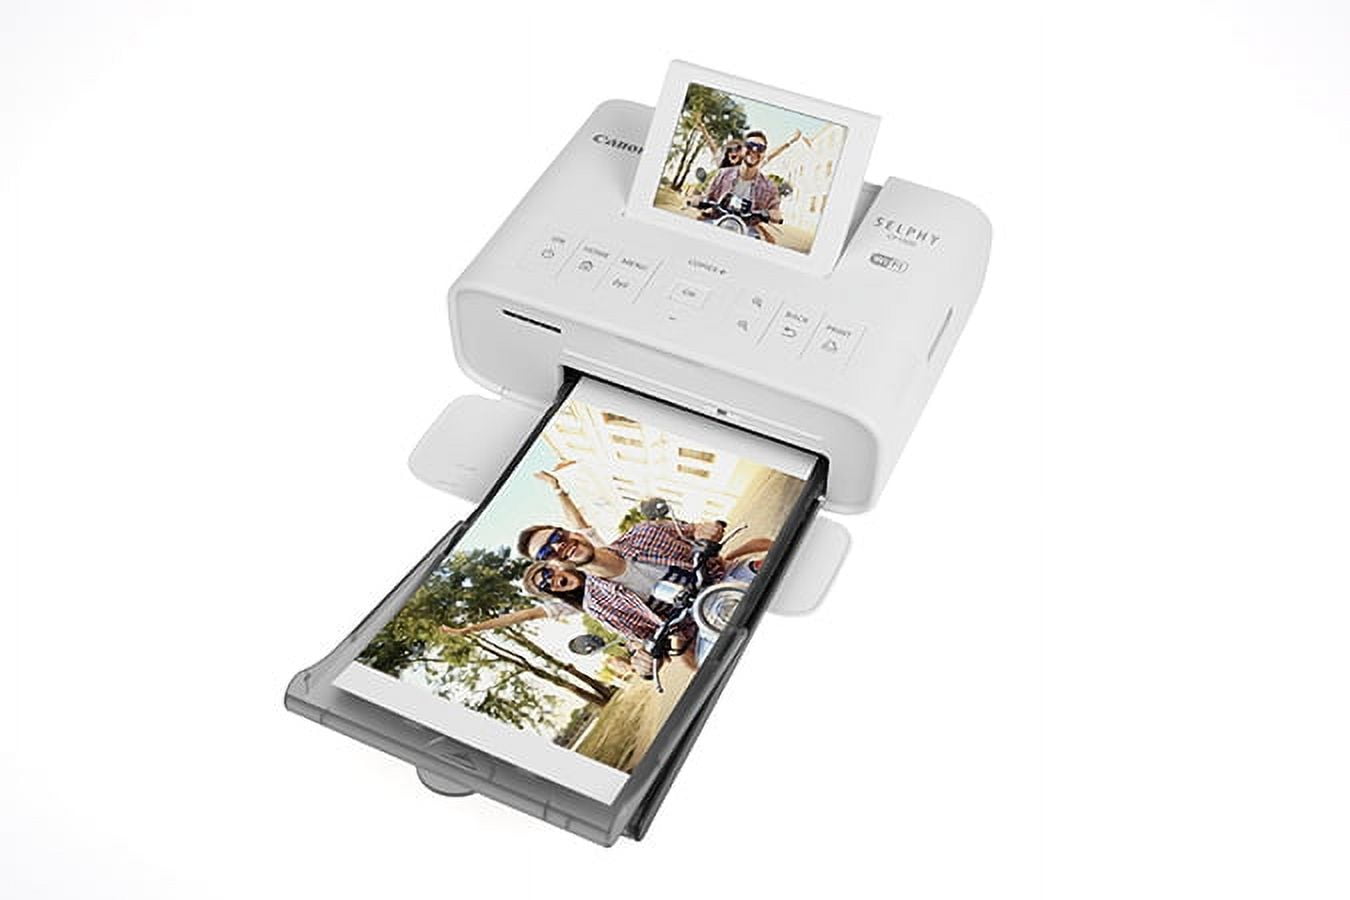 Canon Selphy CP1300 Compact Photo Printer White + KP-108IN Selphy